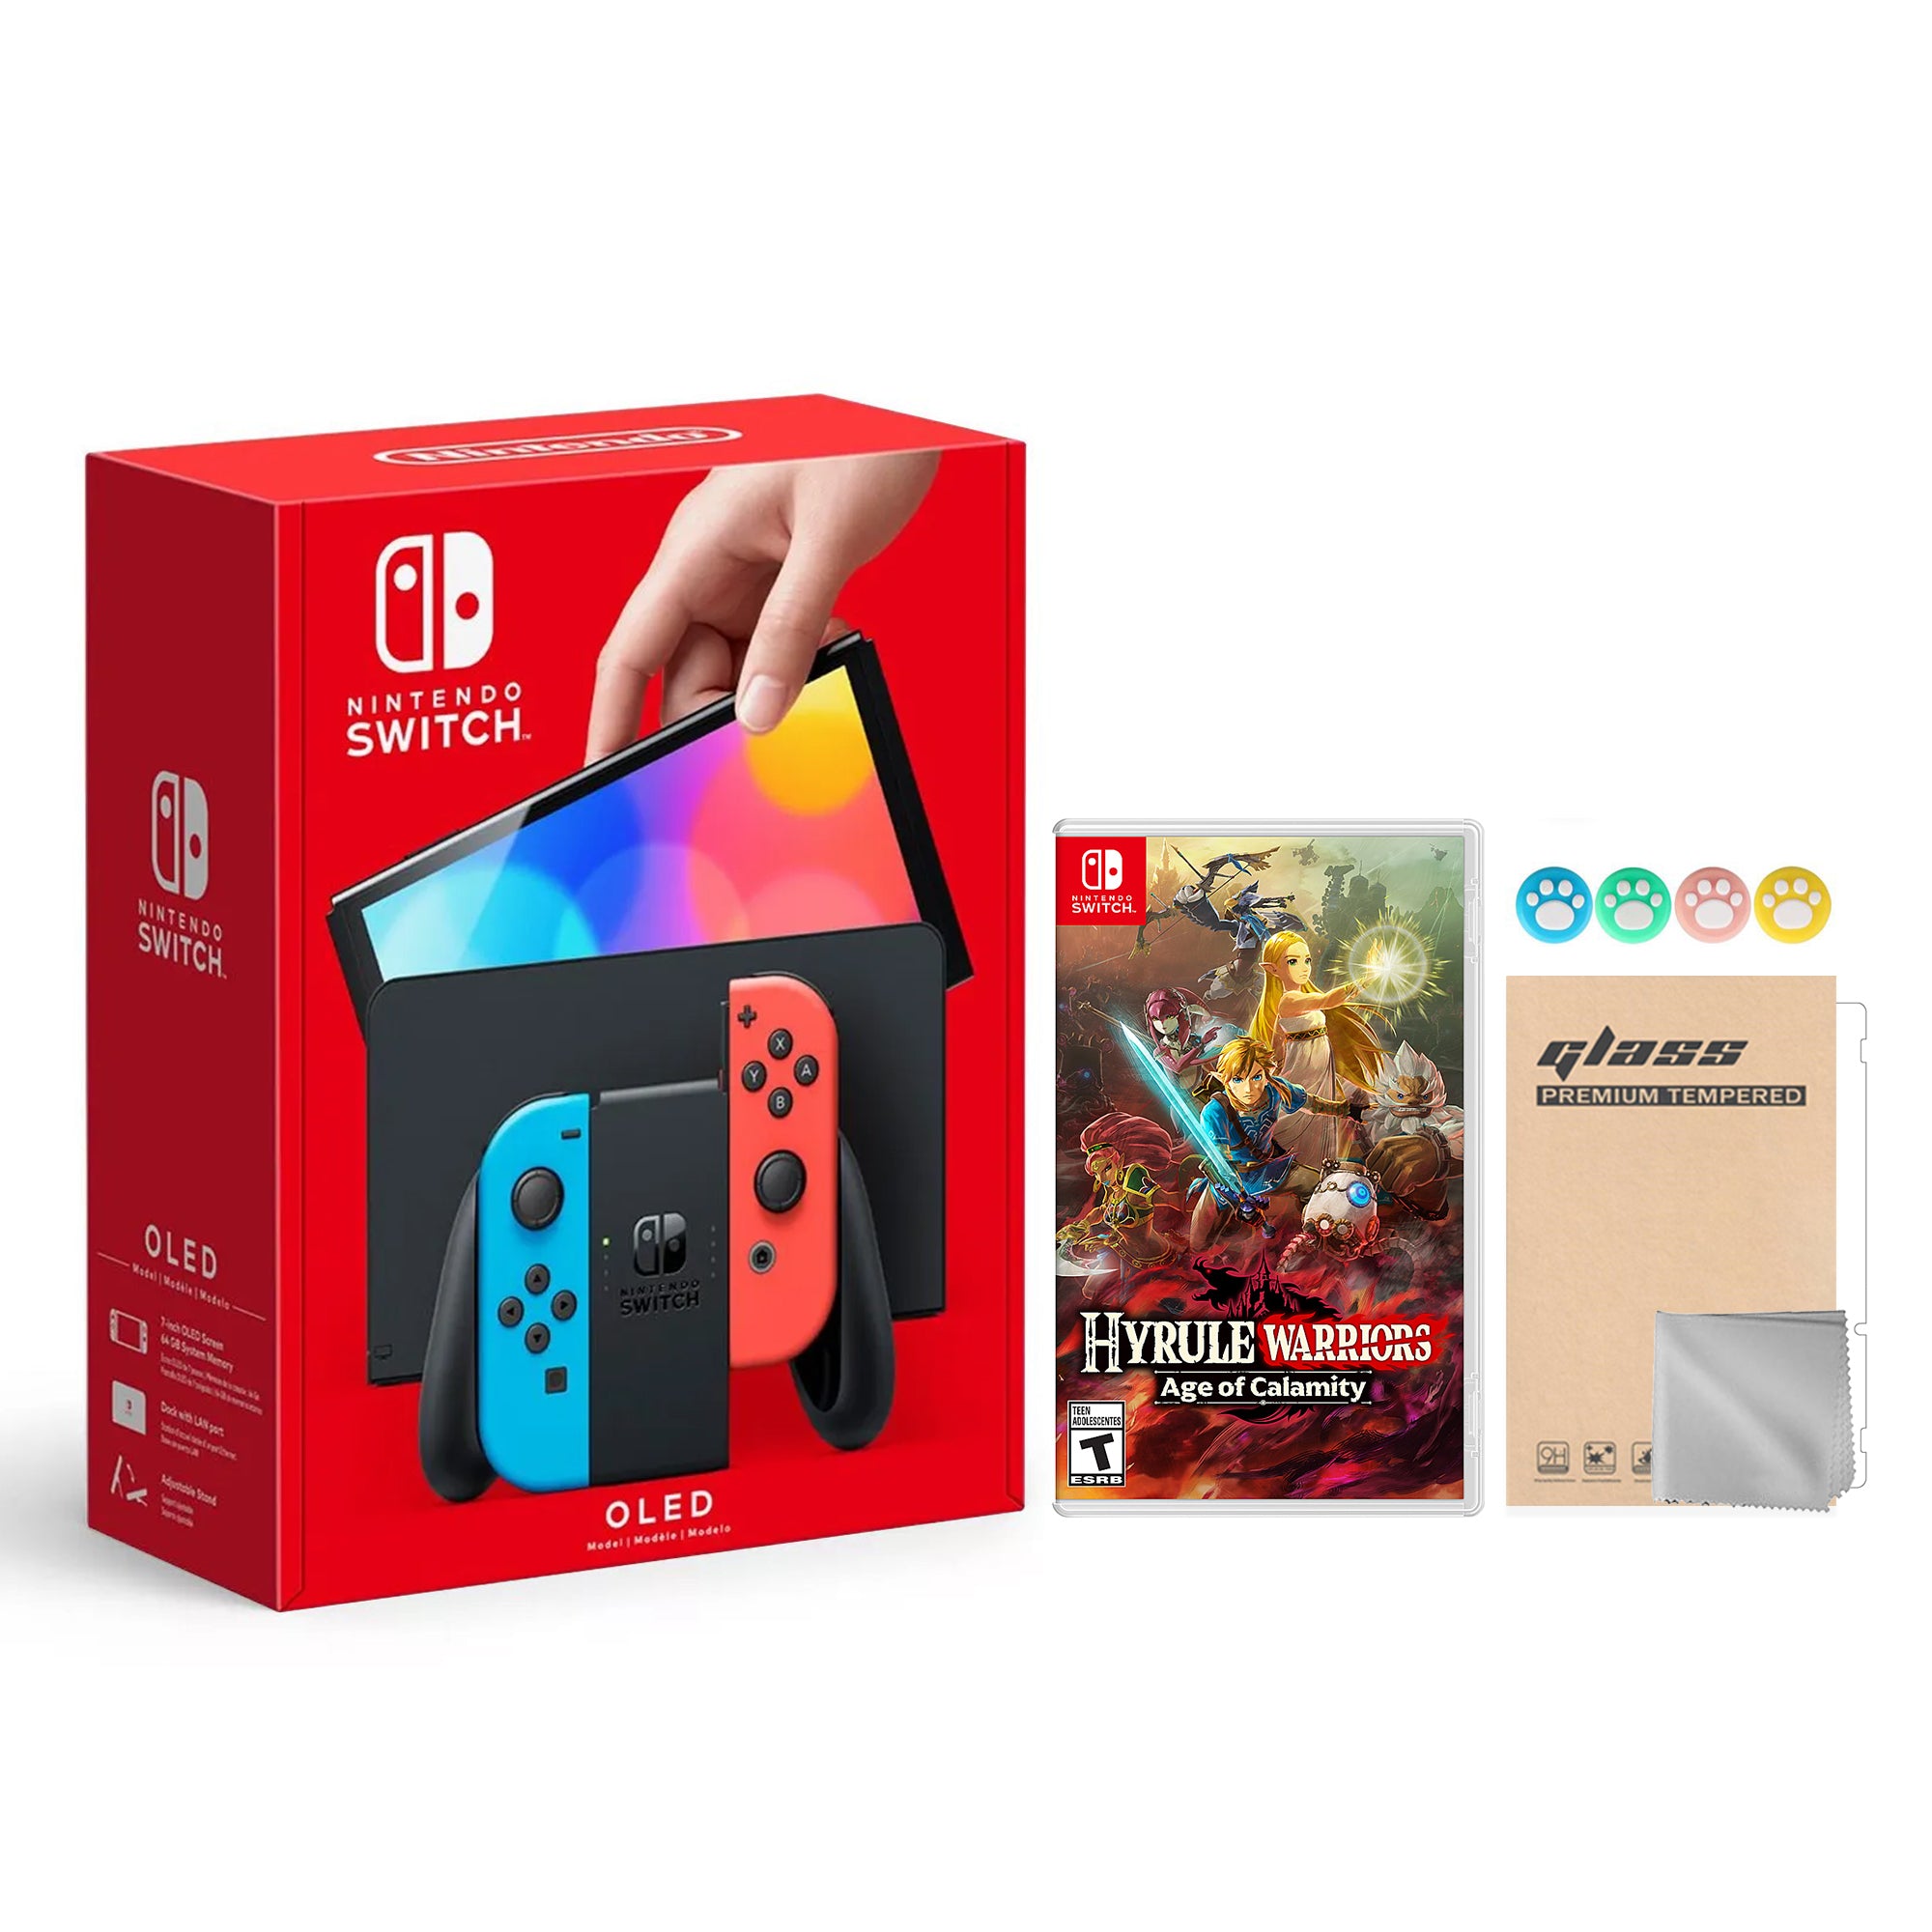 2021 New Nintendo Switch OLED Model Neon Red & Blue Joy Con 64GB Console HD Screen & LAN-Port Dock with Hyrule Warriors: Age of Calamity And Mytrix Joystick Caps & Screen Protector